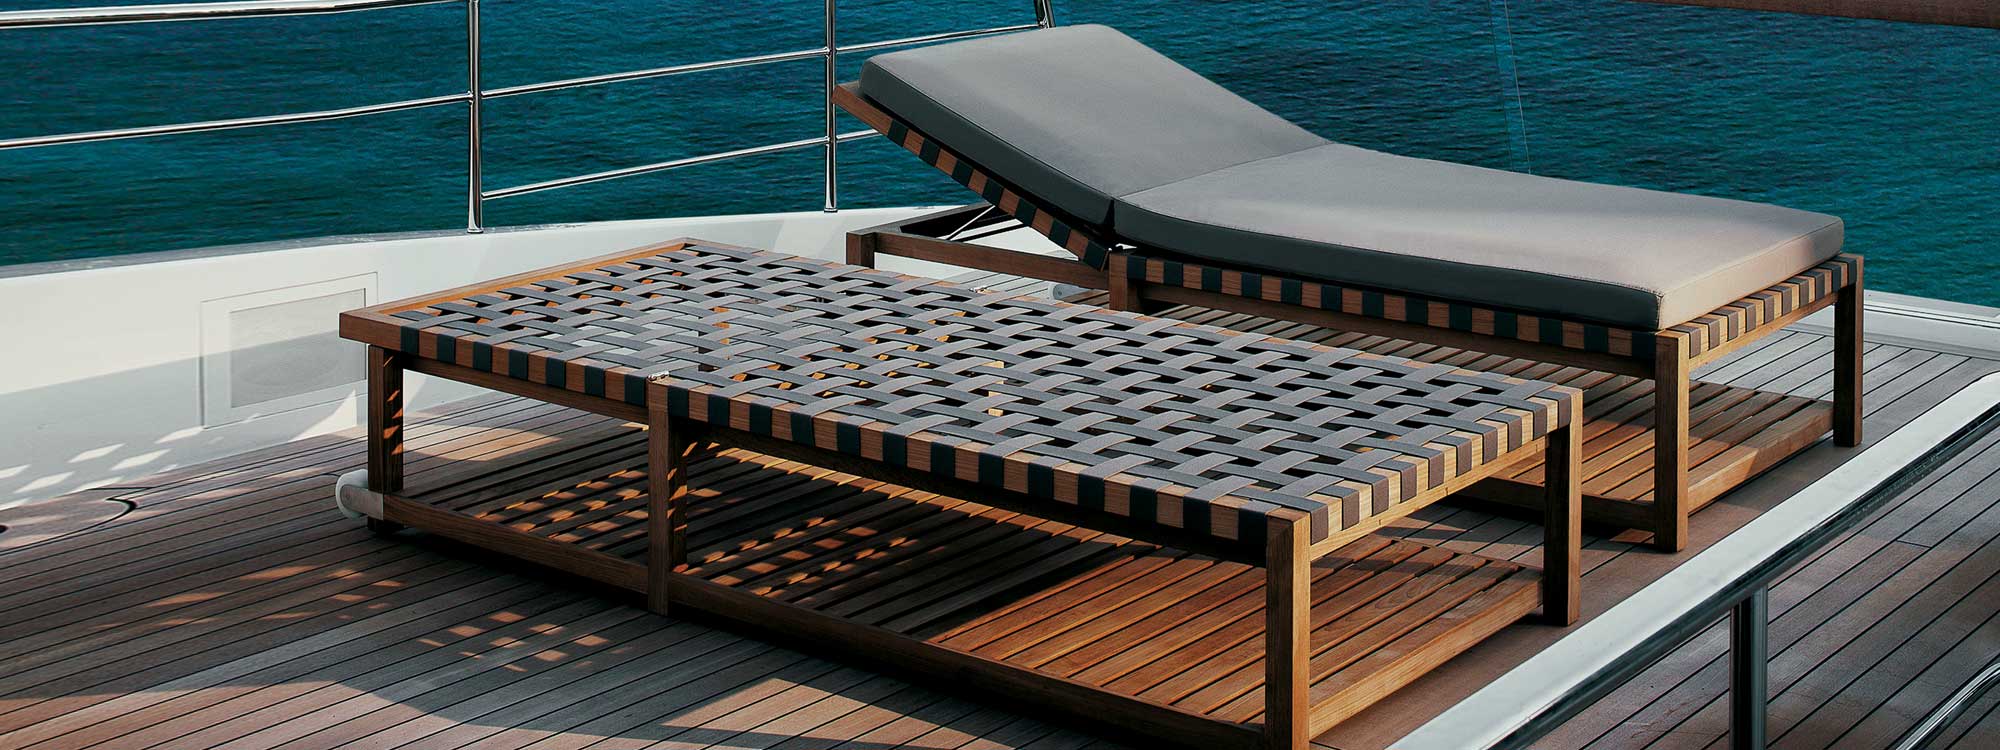 Pair of Network teak sunbeds with Brown webbing and Brown cushion on deck of superyacht